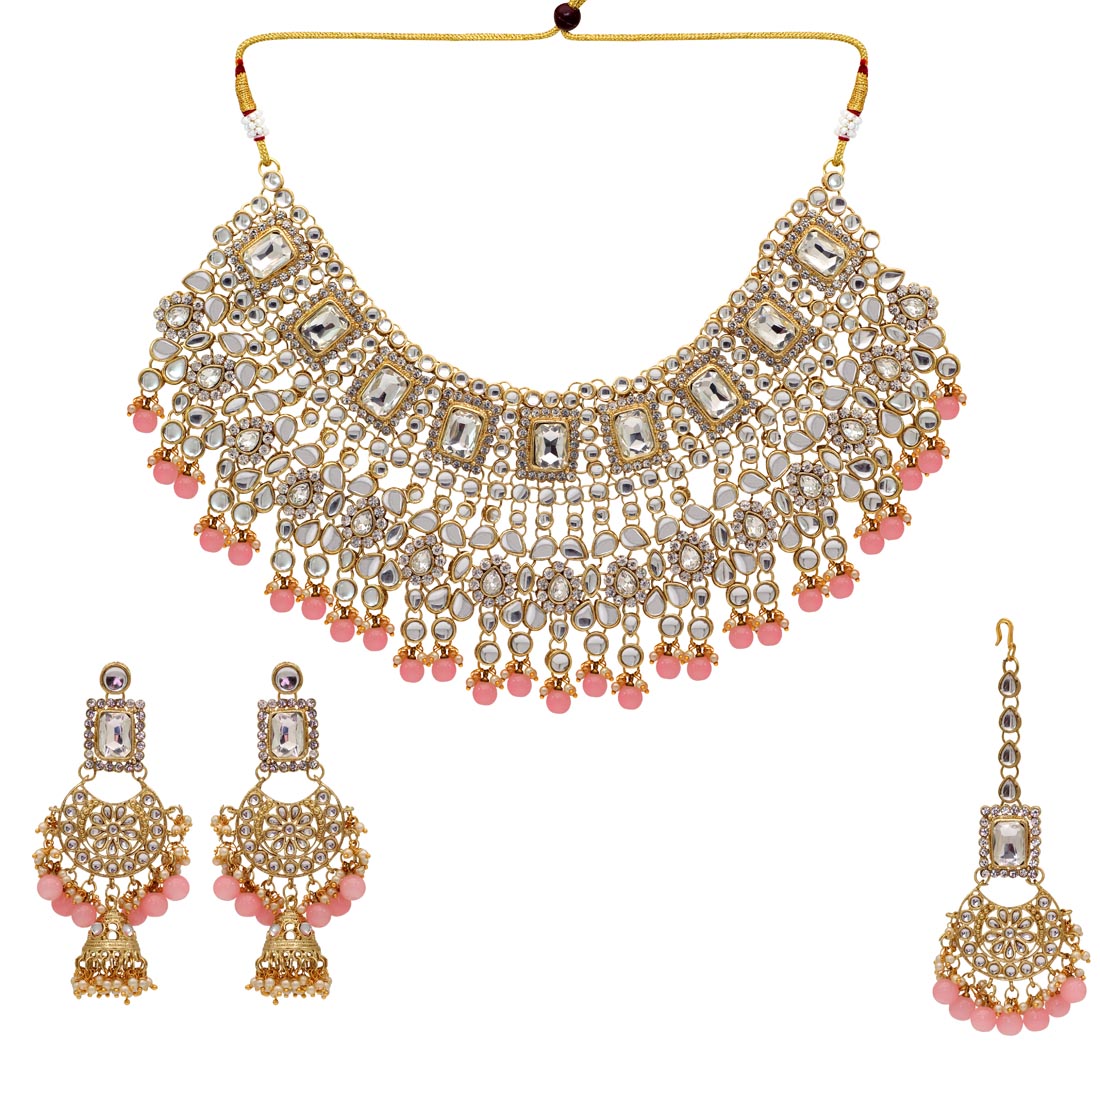 Peach Color Kundan Necklace With Earrings & Maang Tikka (KN222PCH) Jewellery GetGlit   